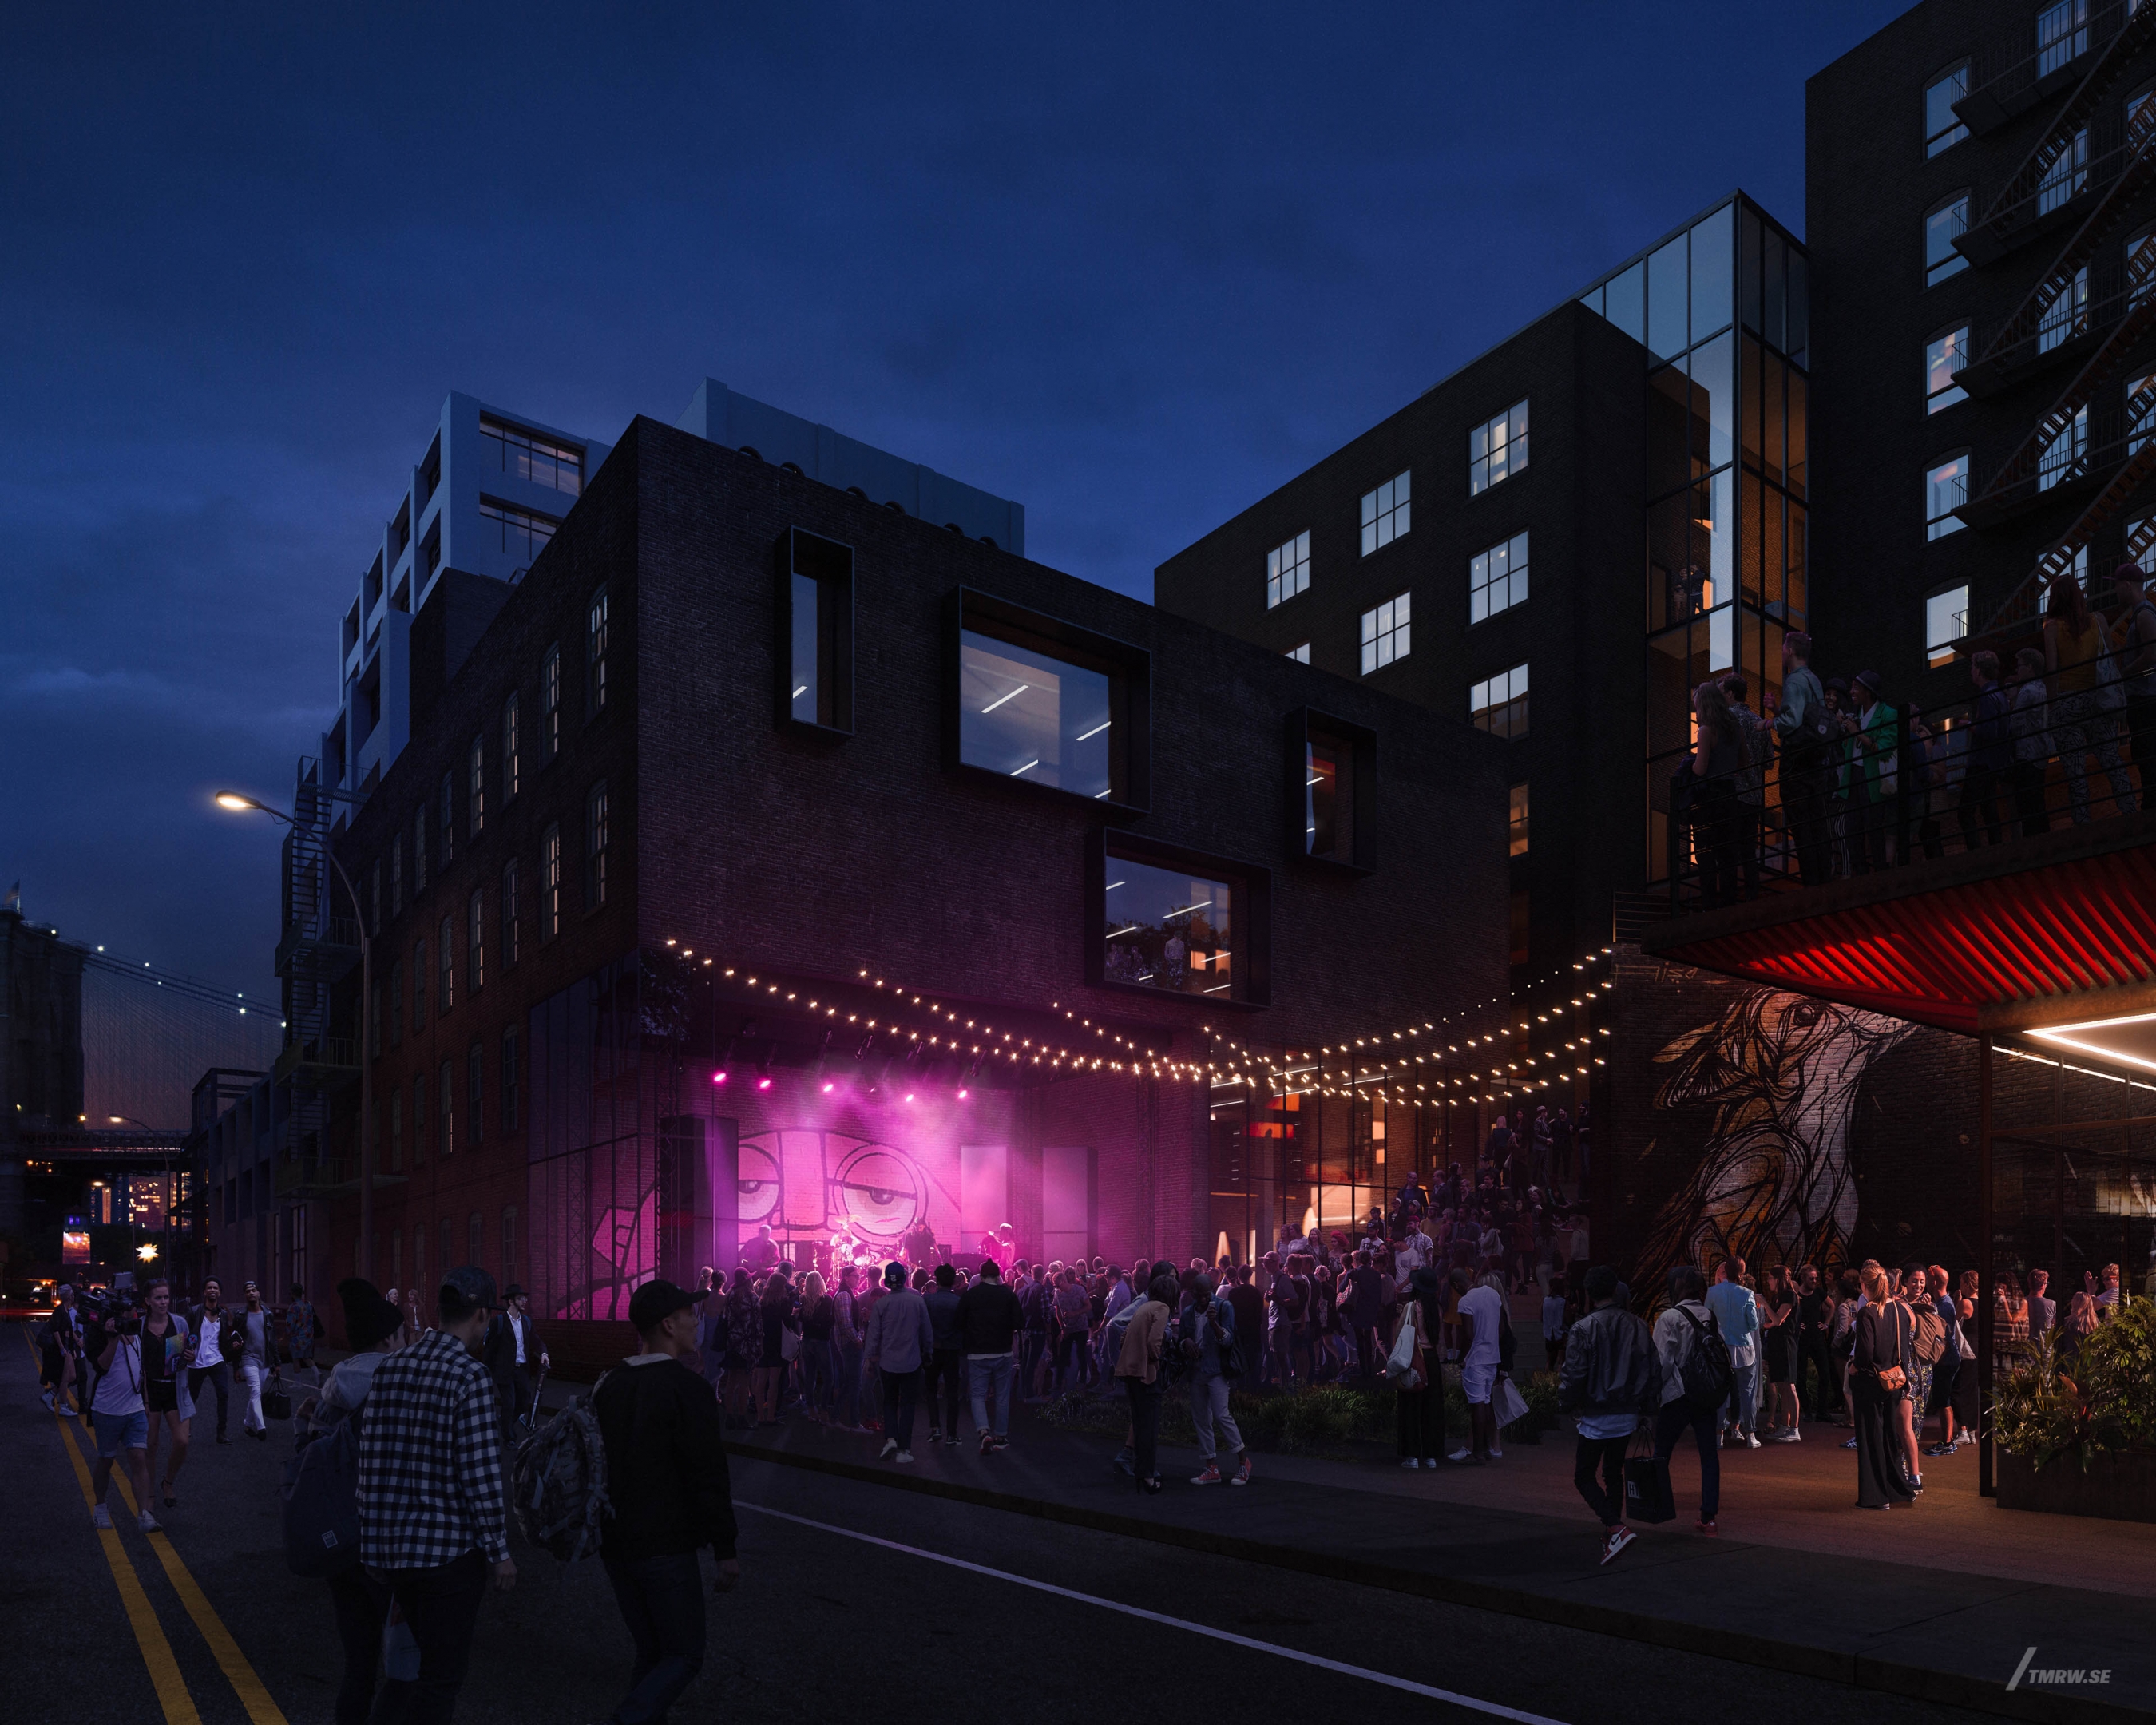 Architectural visualization of Columbia Heights for Gensler, exterior of a street dance party in the night